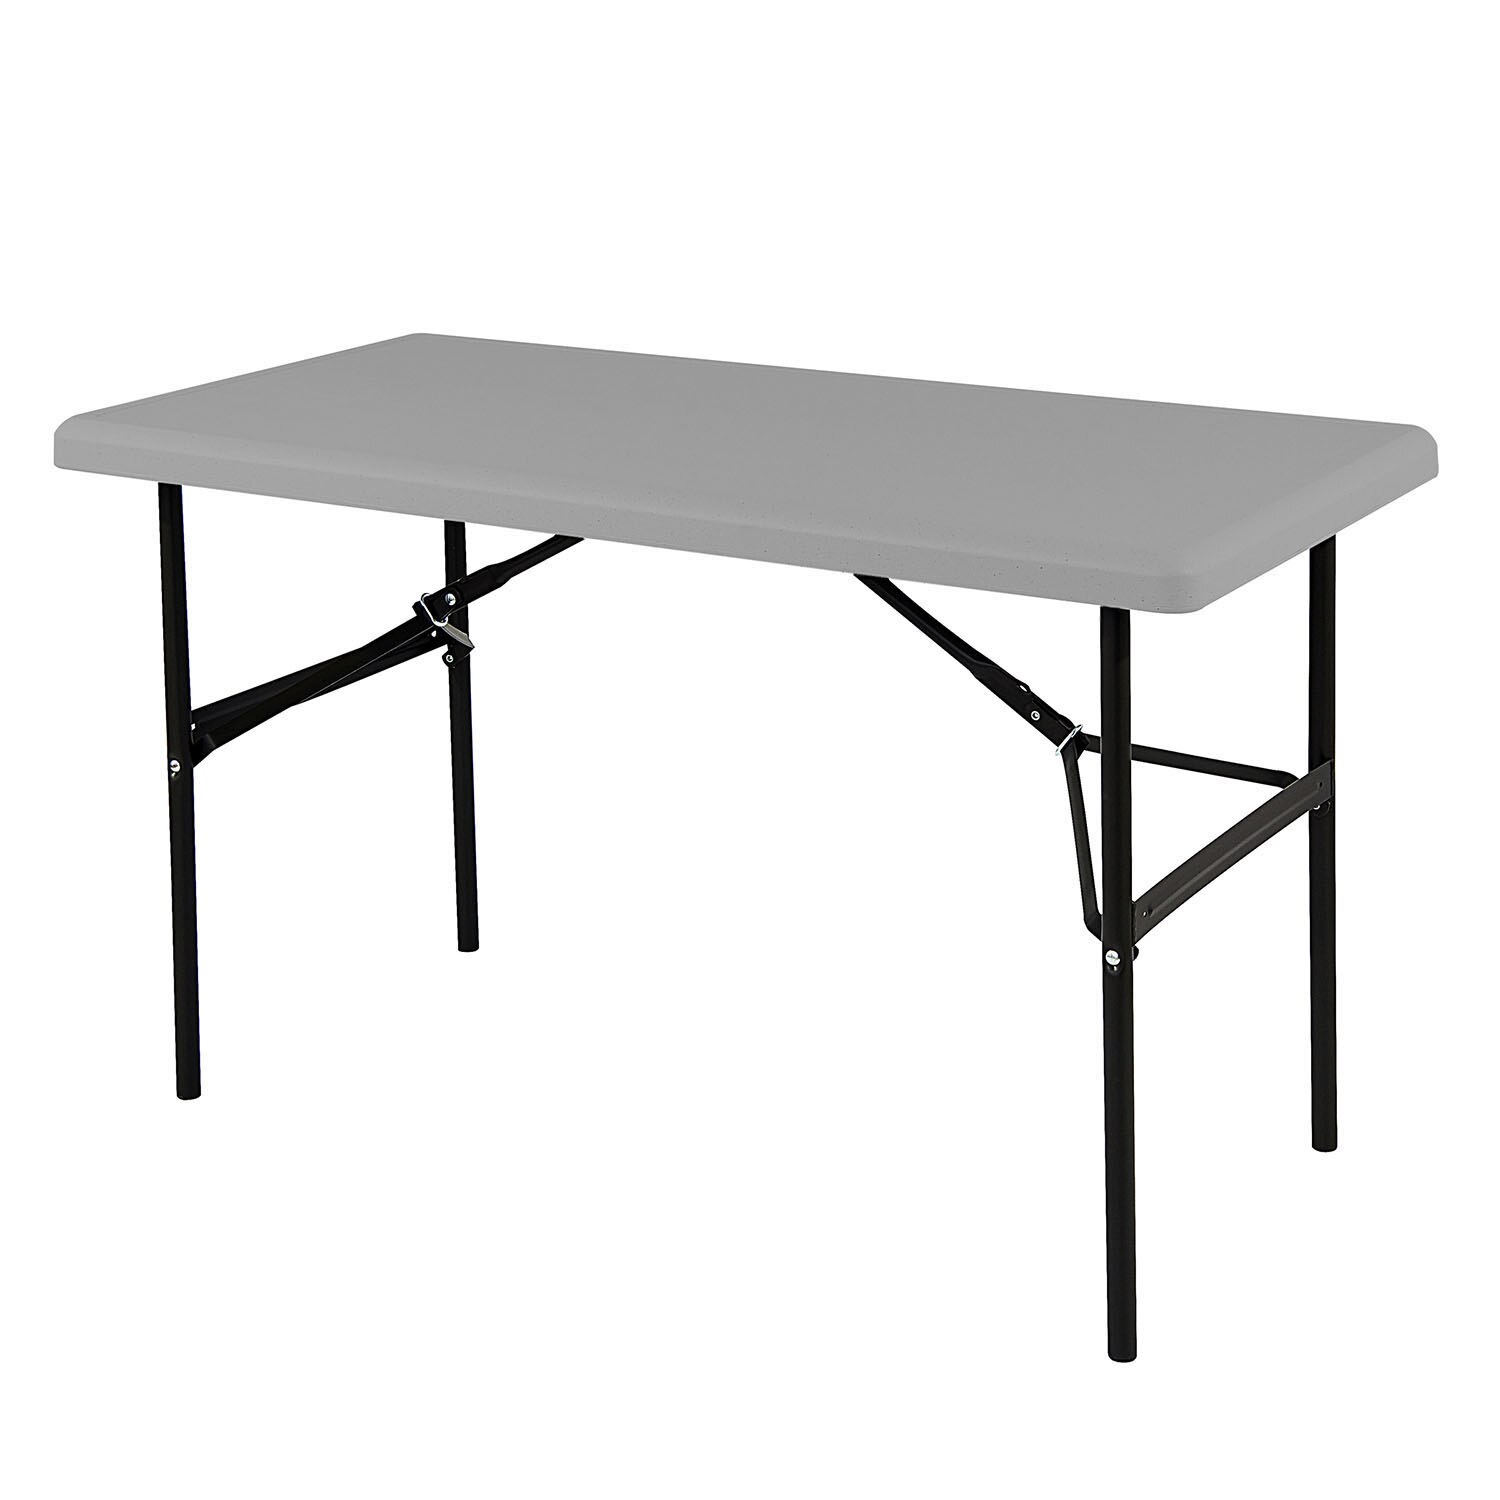 Table, Folding, Blow-Molded, Charcoal, 30" x 96"